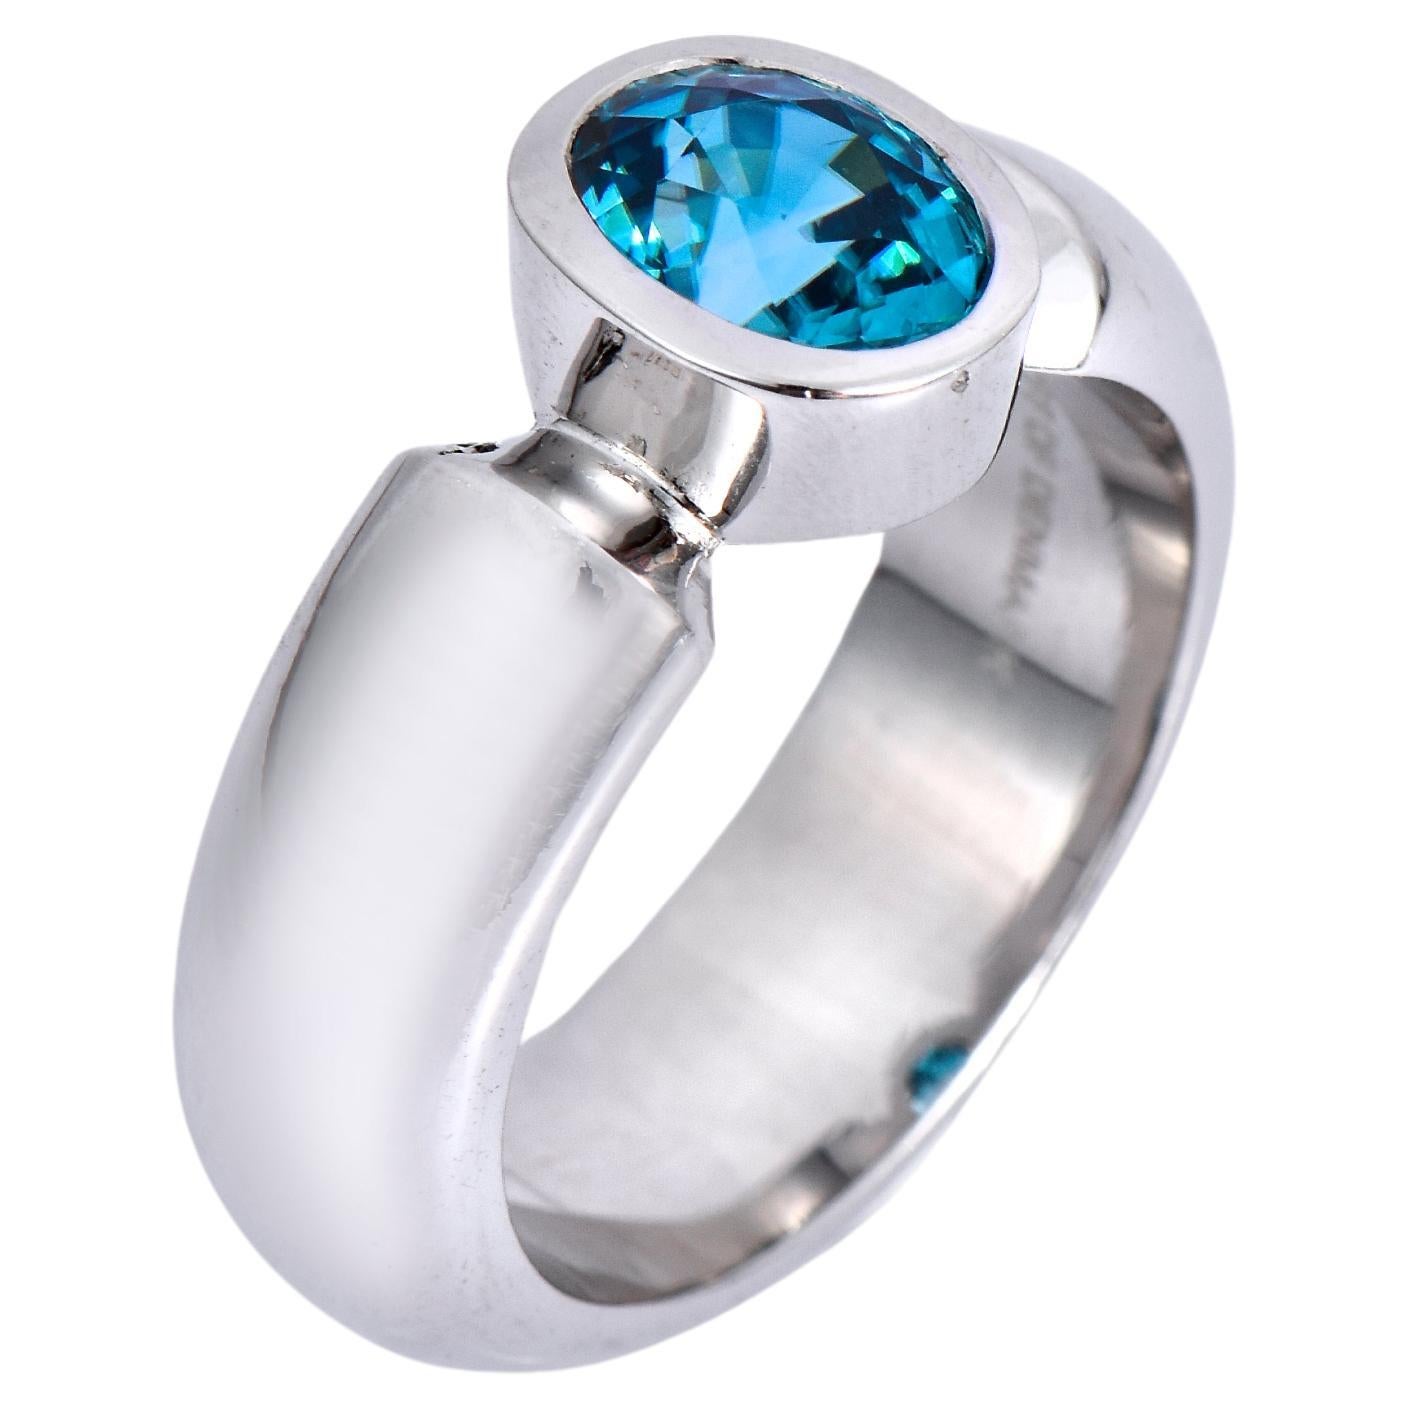 Orloff of Denmark, 2.38 ct Natural Blue Zircon Ring in 925 Sterling Silver